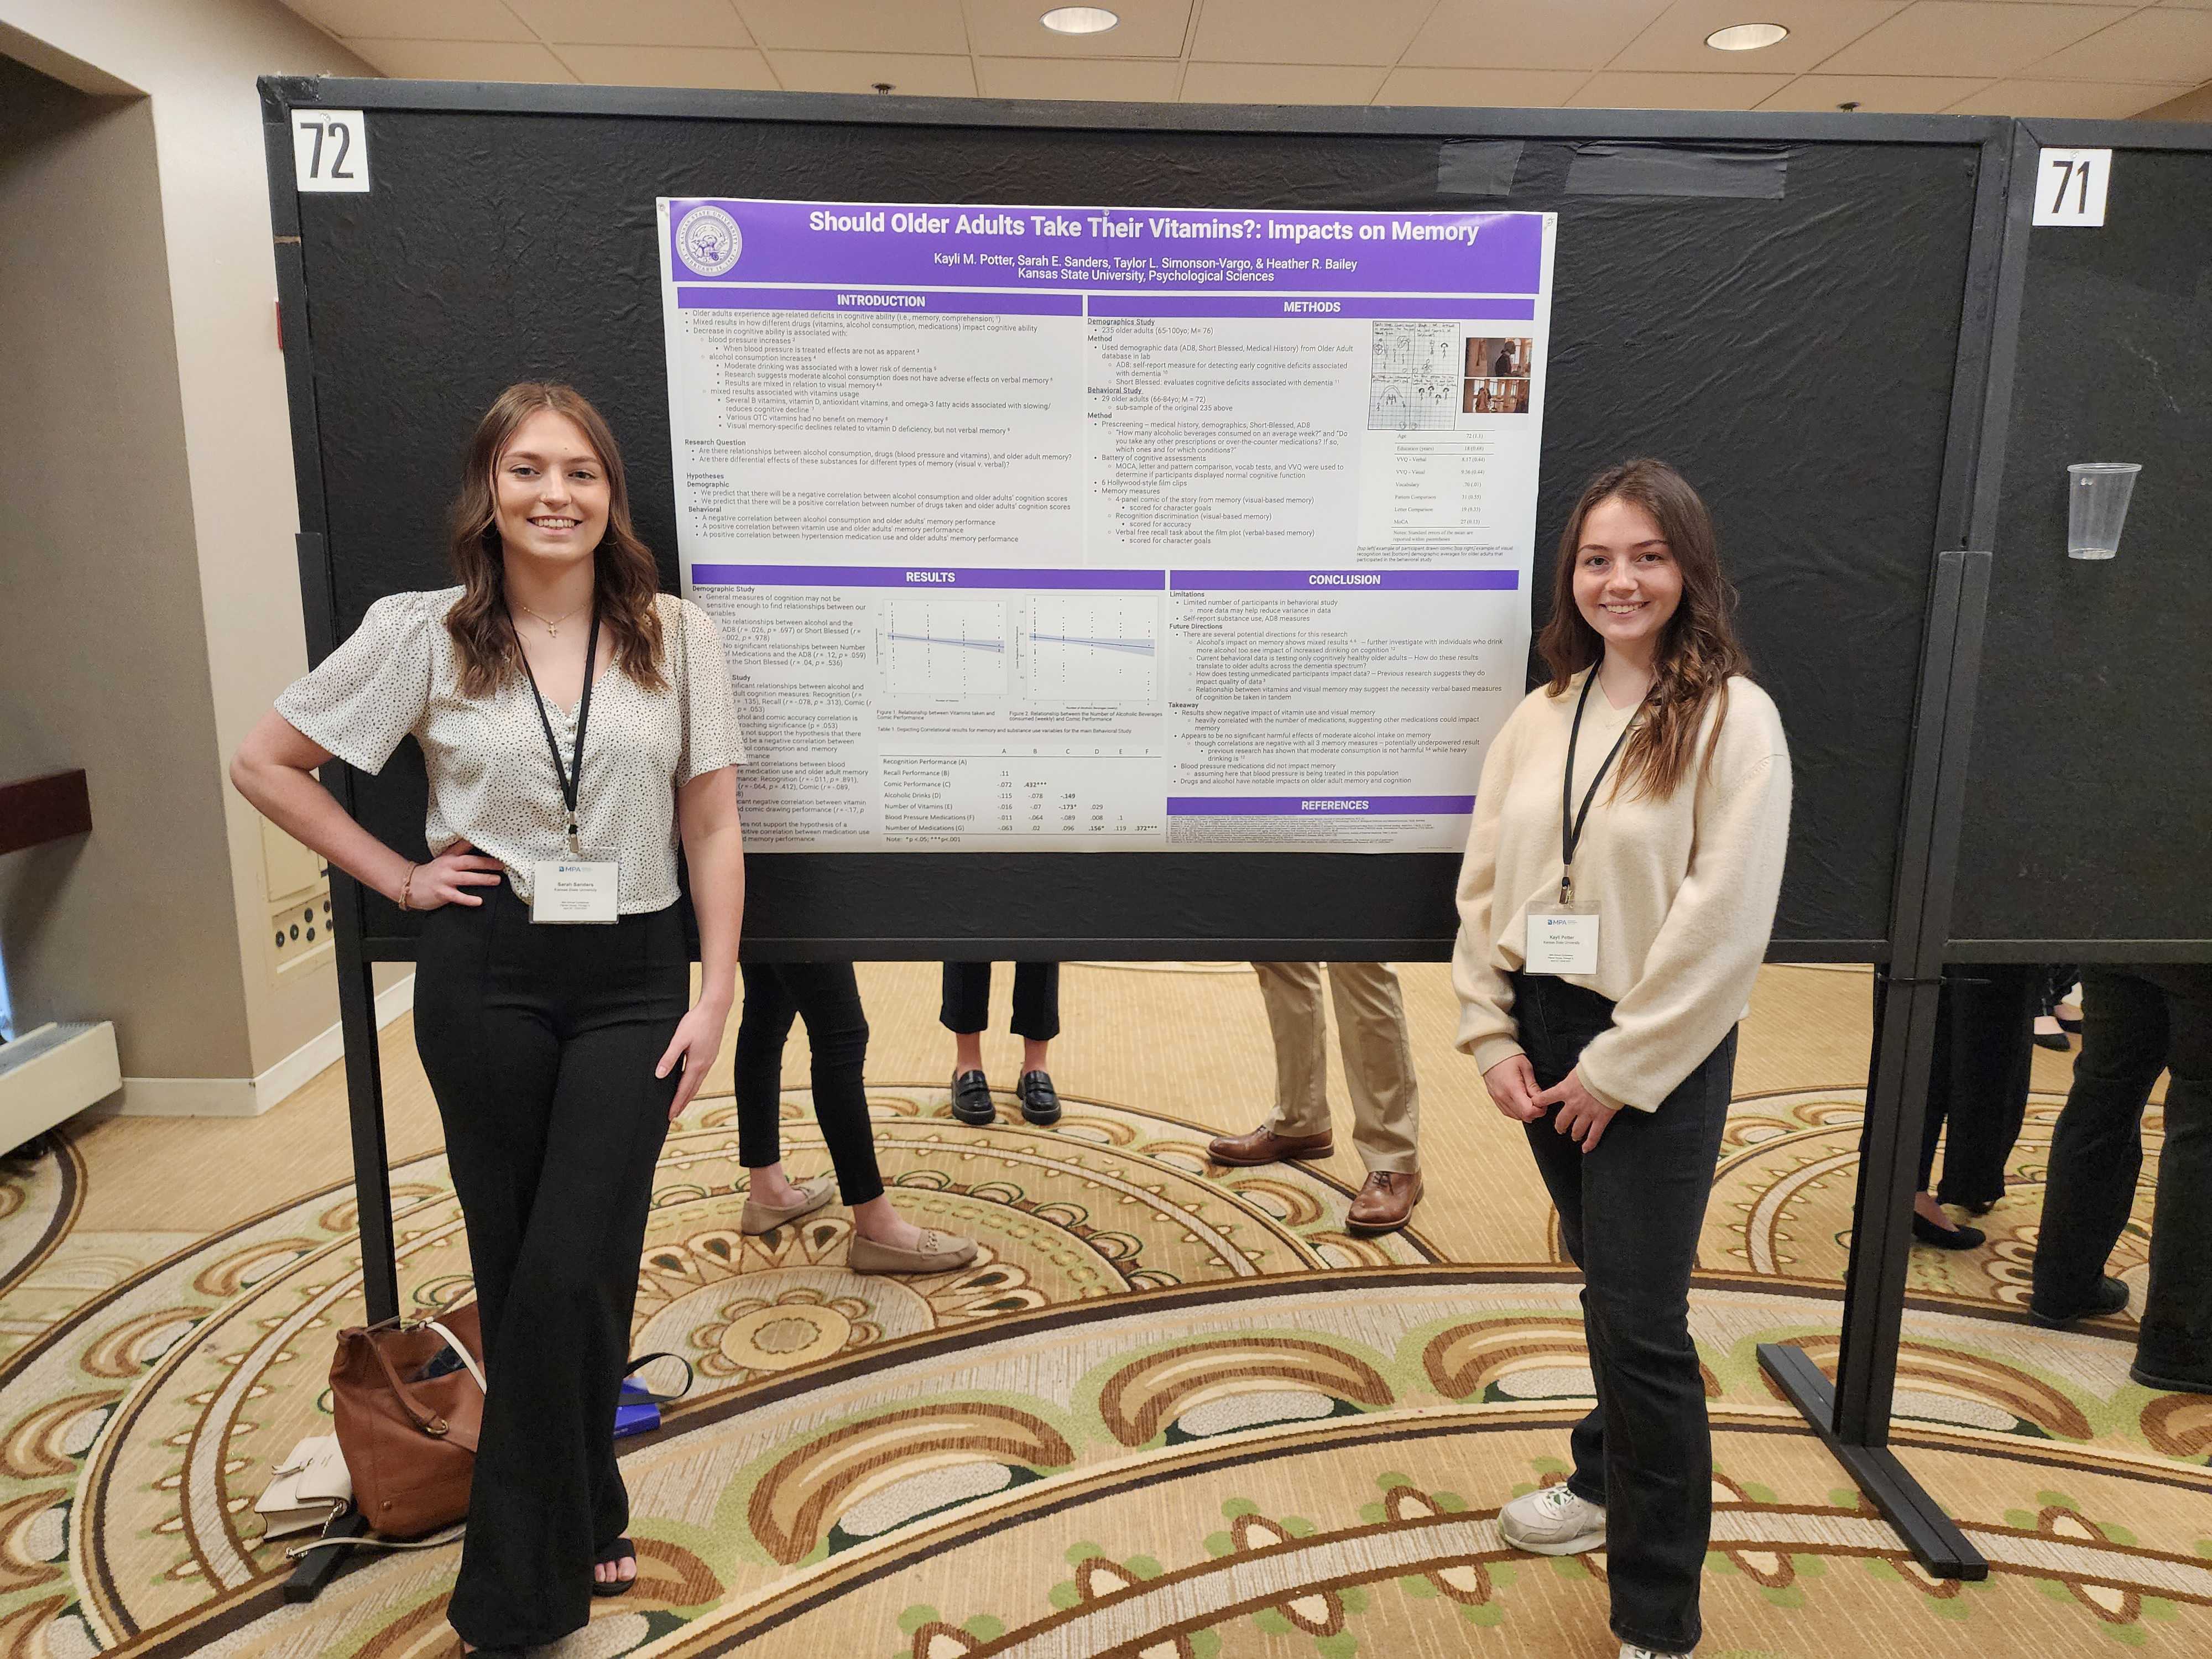 These are undergraduates, Sarah and Kayli, who are presenting their poster titled "Should Older Adults Take Their Vitamins?: Impacts on Memory".